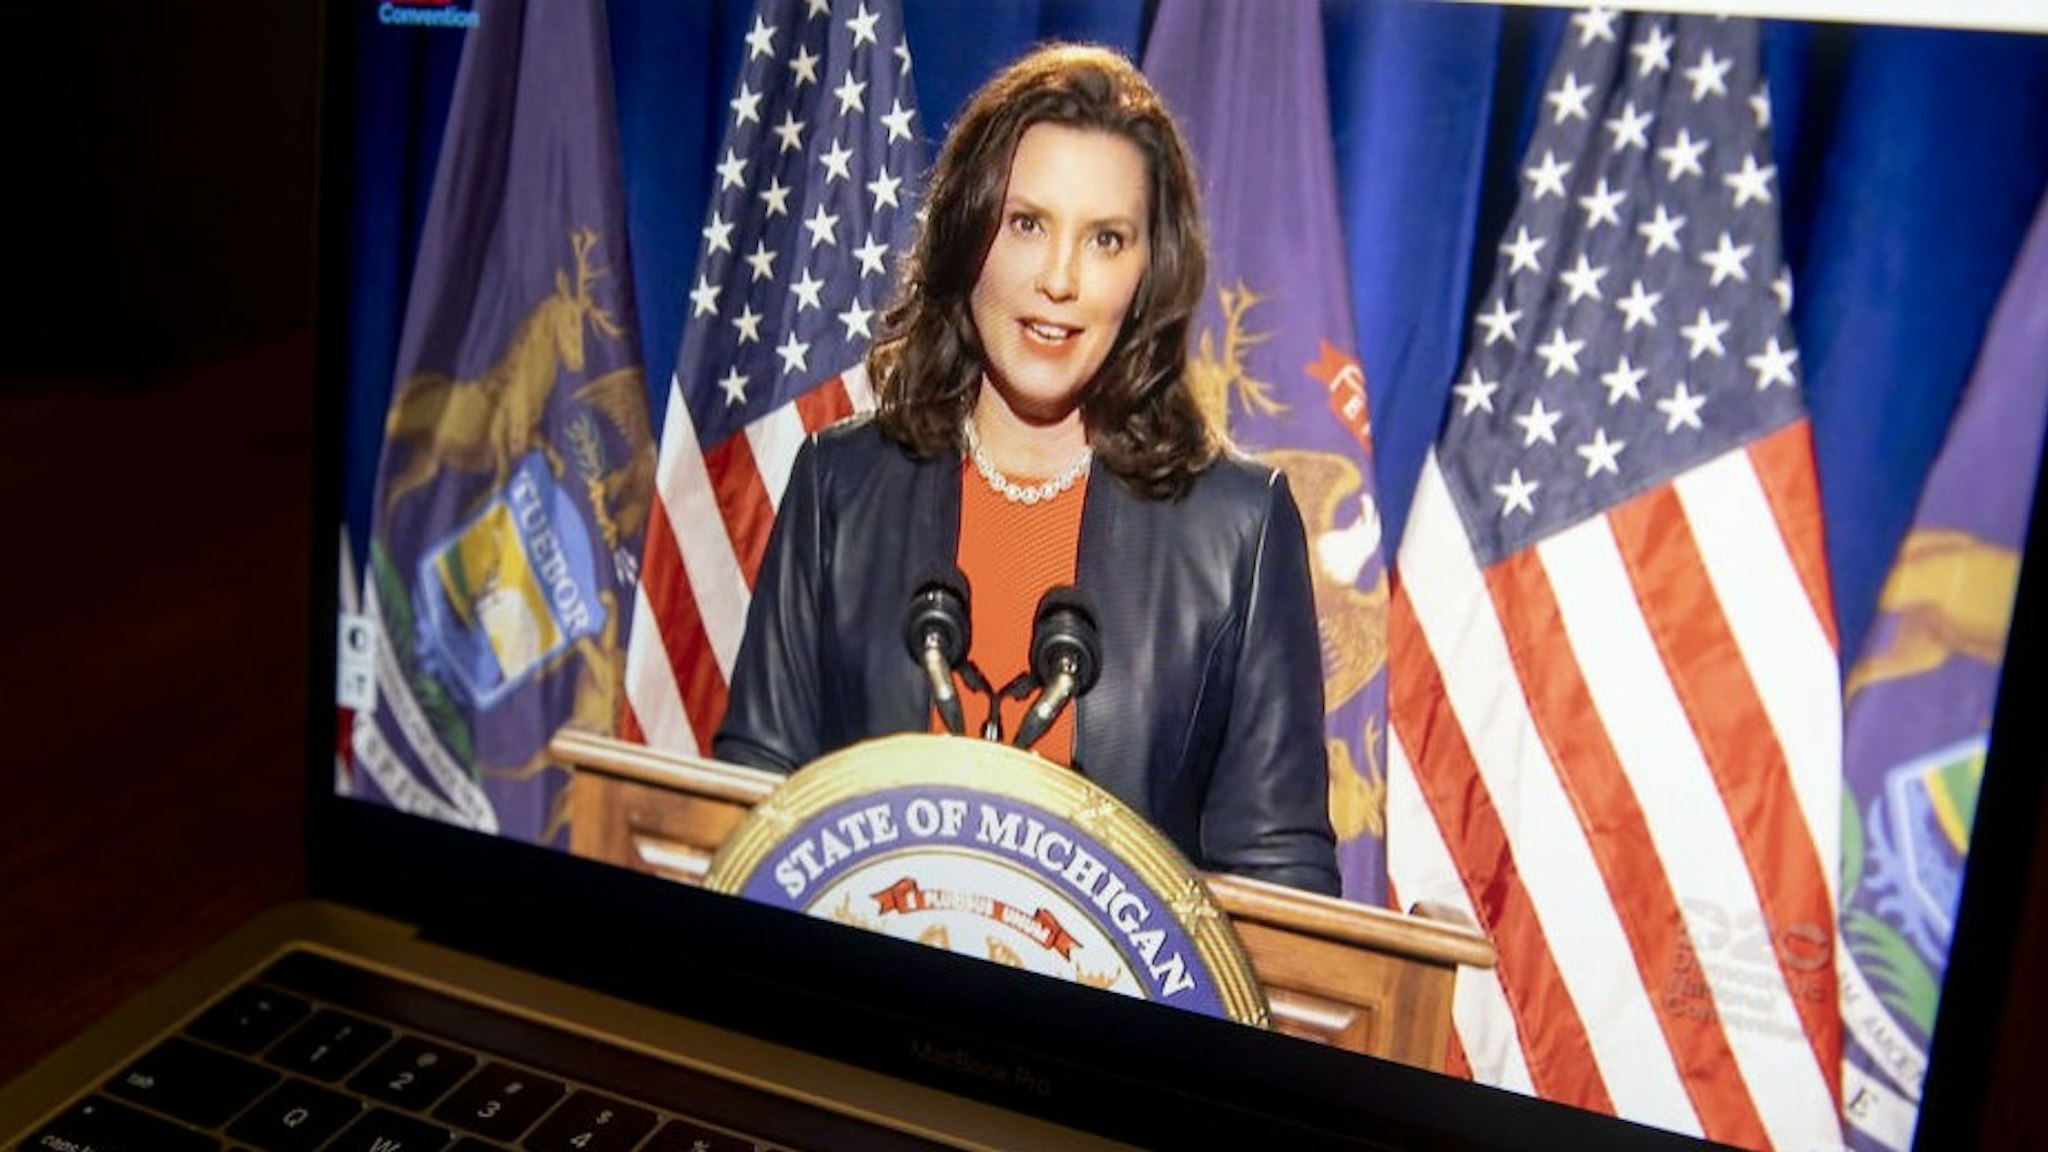 Gretchen Whitmer, governor of Michigan, speaks during the virtual Democratic National Convention seen on a laptop computer in Tiskilwa, Illinois, U.S., on Monday, Aug. 17, 2020. The DNC, which begins today and ends Thursday with Joe Biden accepting the nomination for president, will be almost entirely virtual with speakers delivering addresses from around the U.S. that will be streamed on the internet. Photographer: